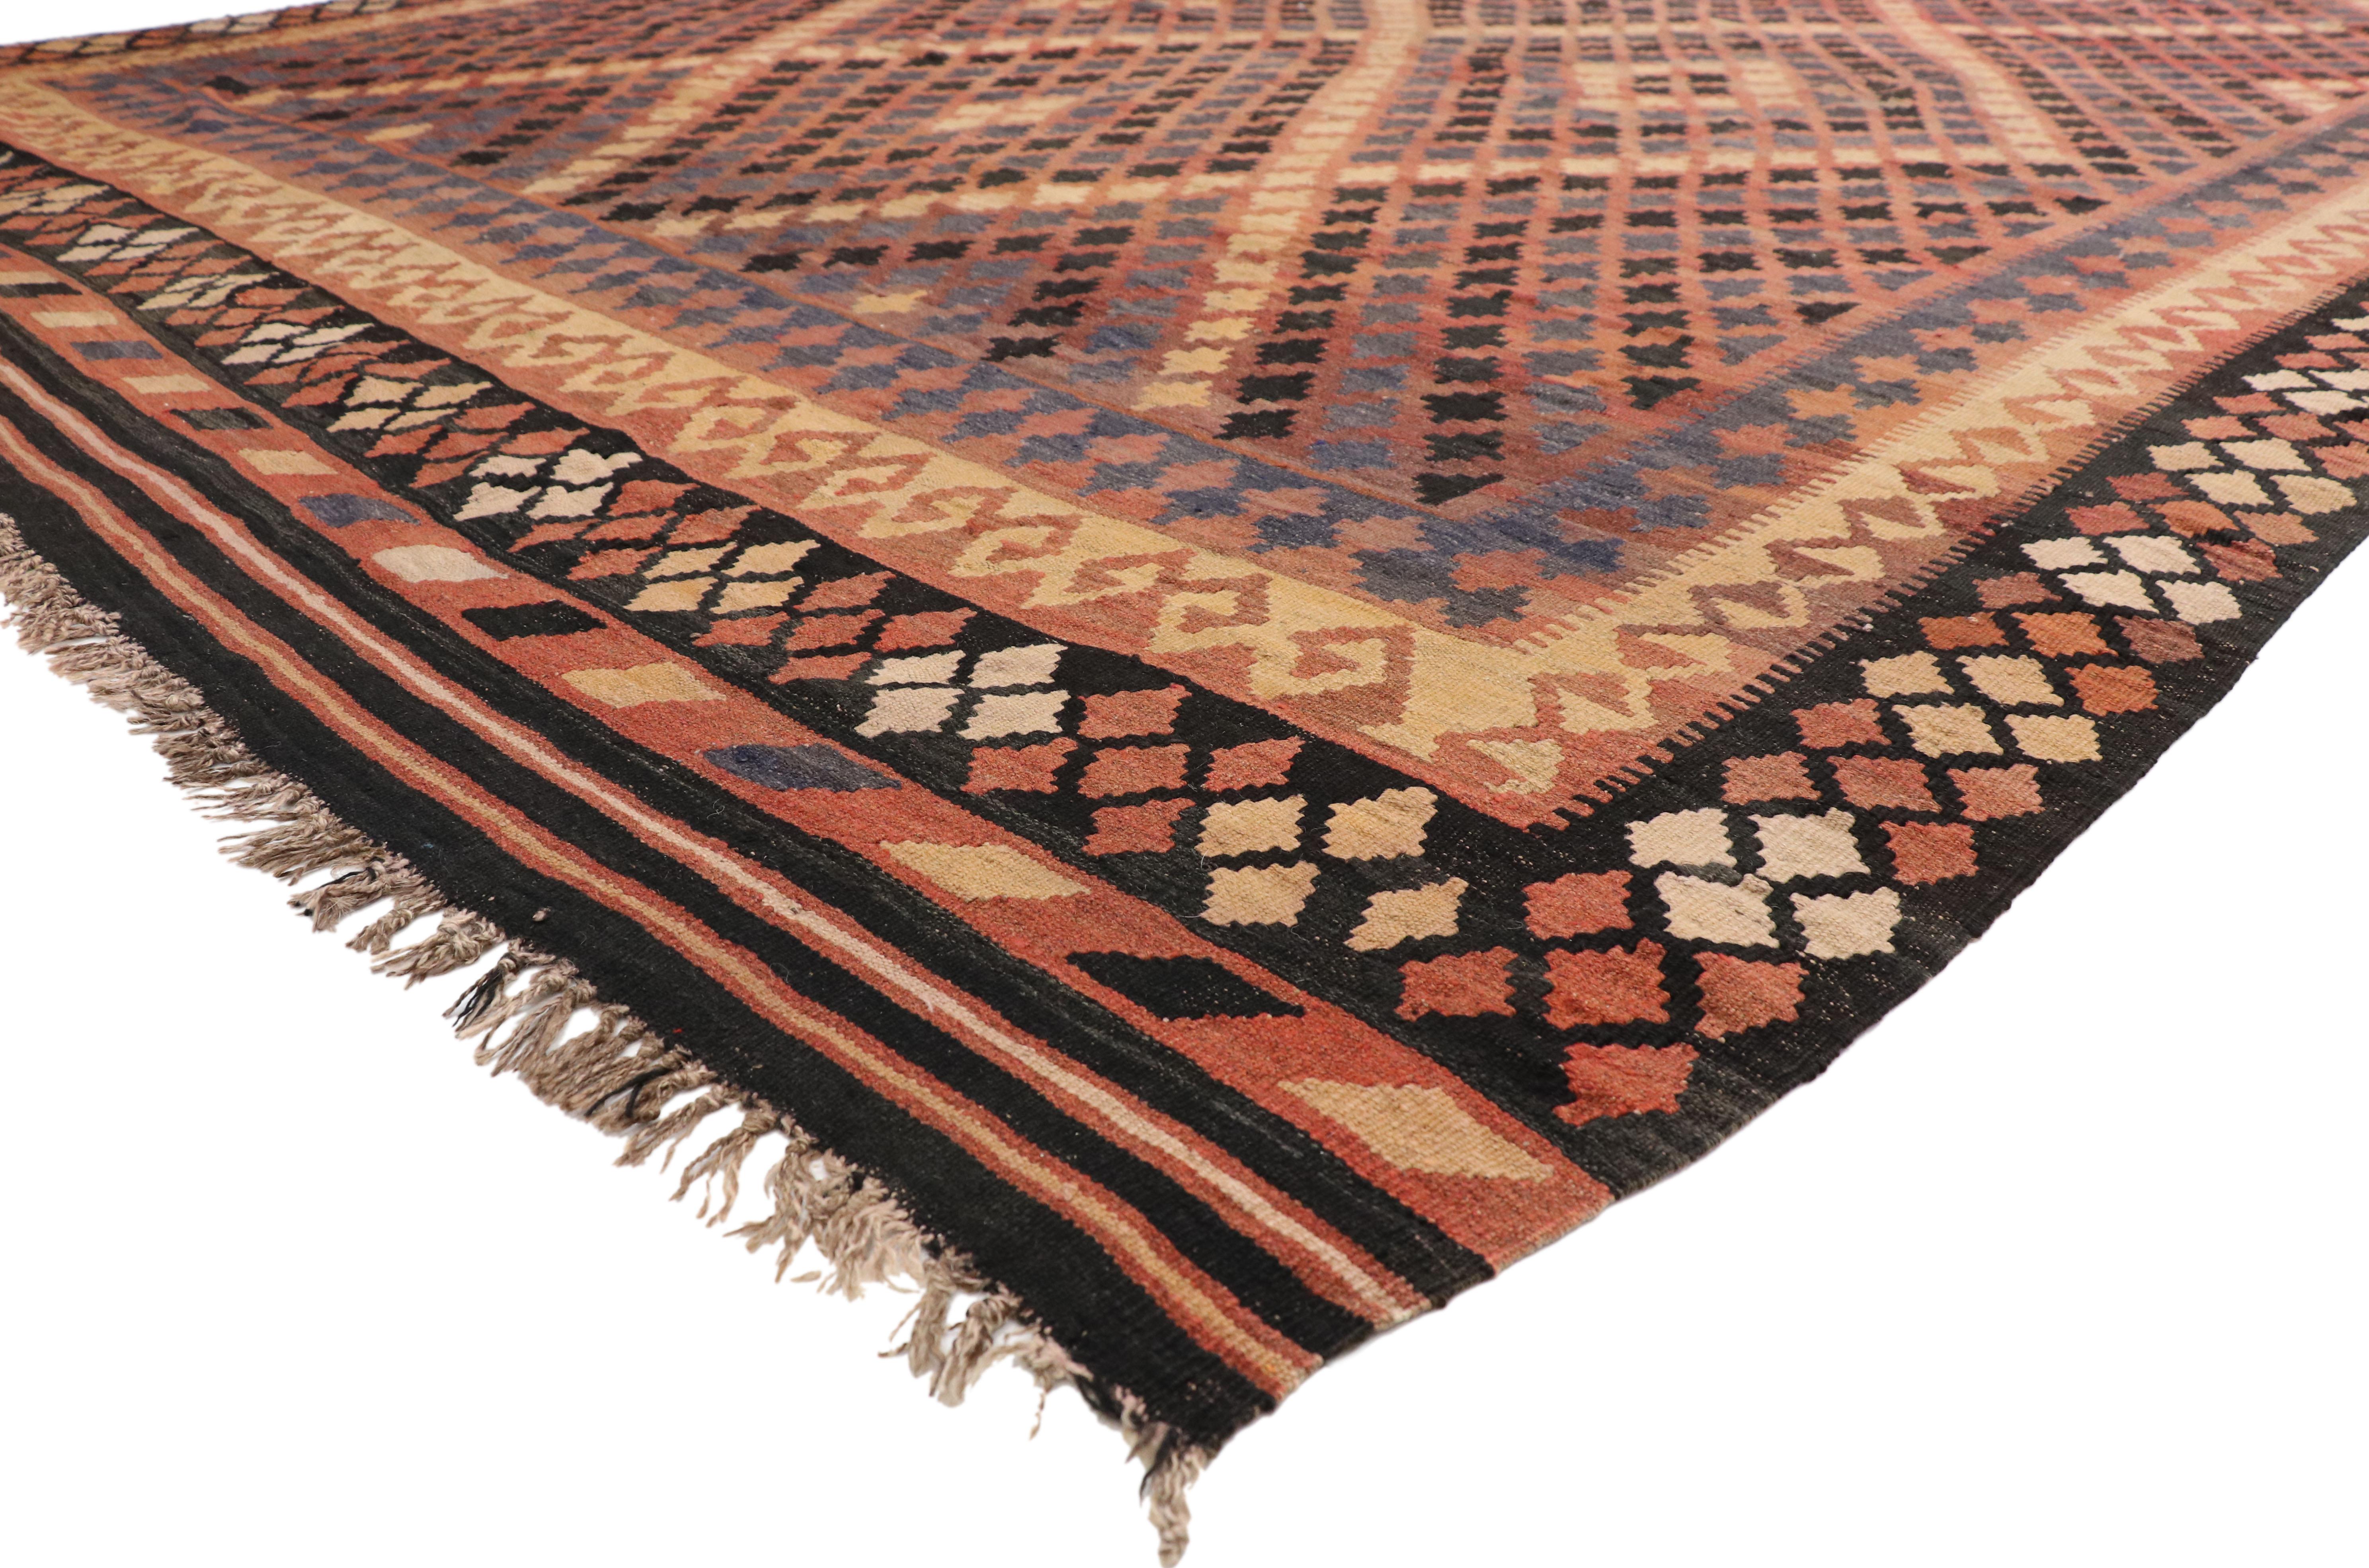 72258 Vintage Afghan Ghalmouri Maimana Kilim Rug with Nomadic Tribal Style 09'06 x 14'04. Highlighting nomadic charm and tribal vibes, this hand-woven wool vintage Afghan Ghalmouri Maimana Kilim rug beautifully showcases Mid-Century modern style. It